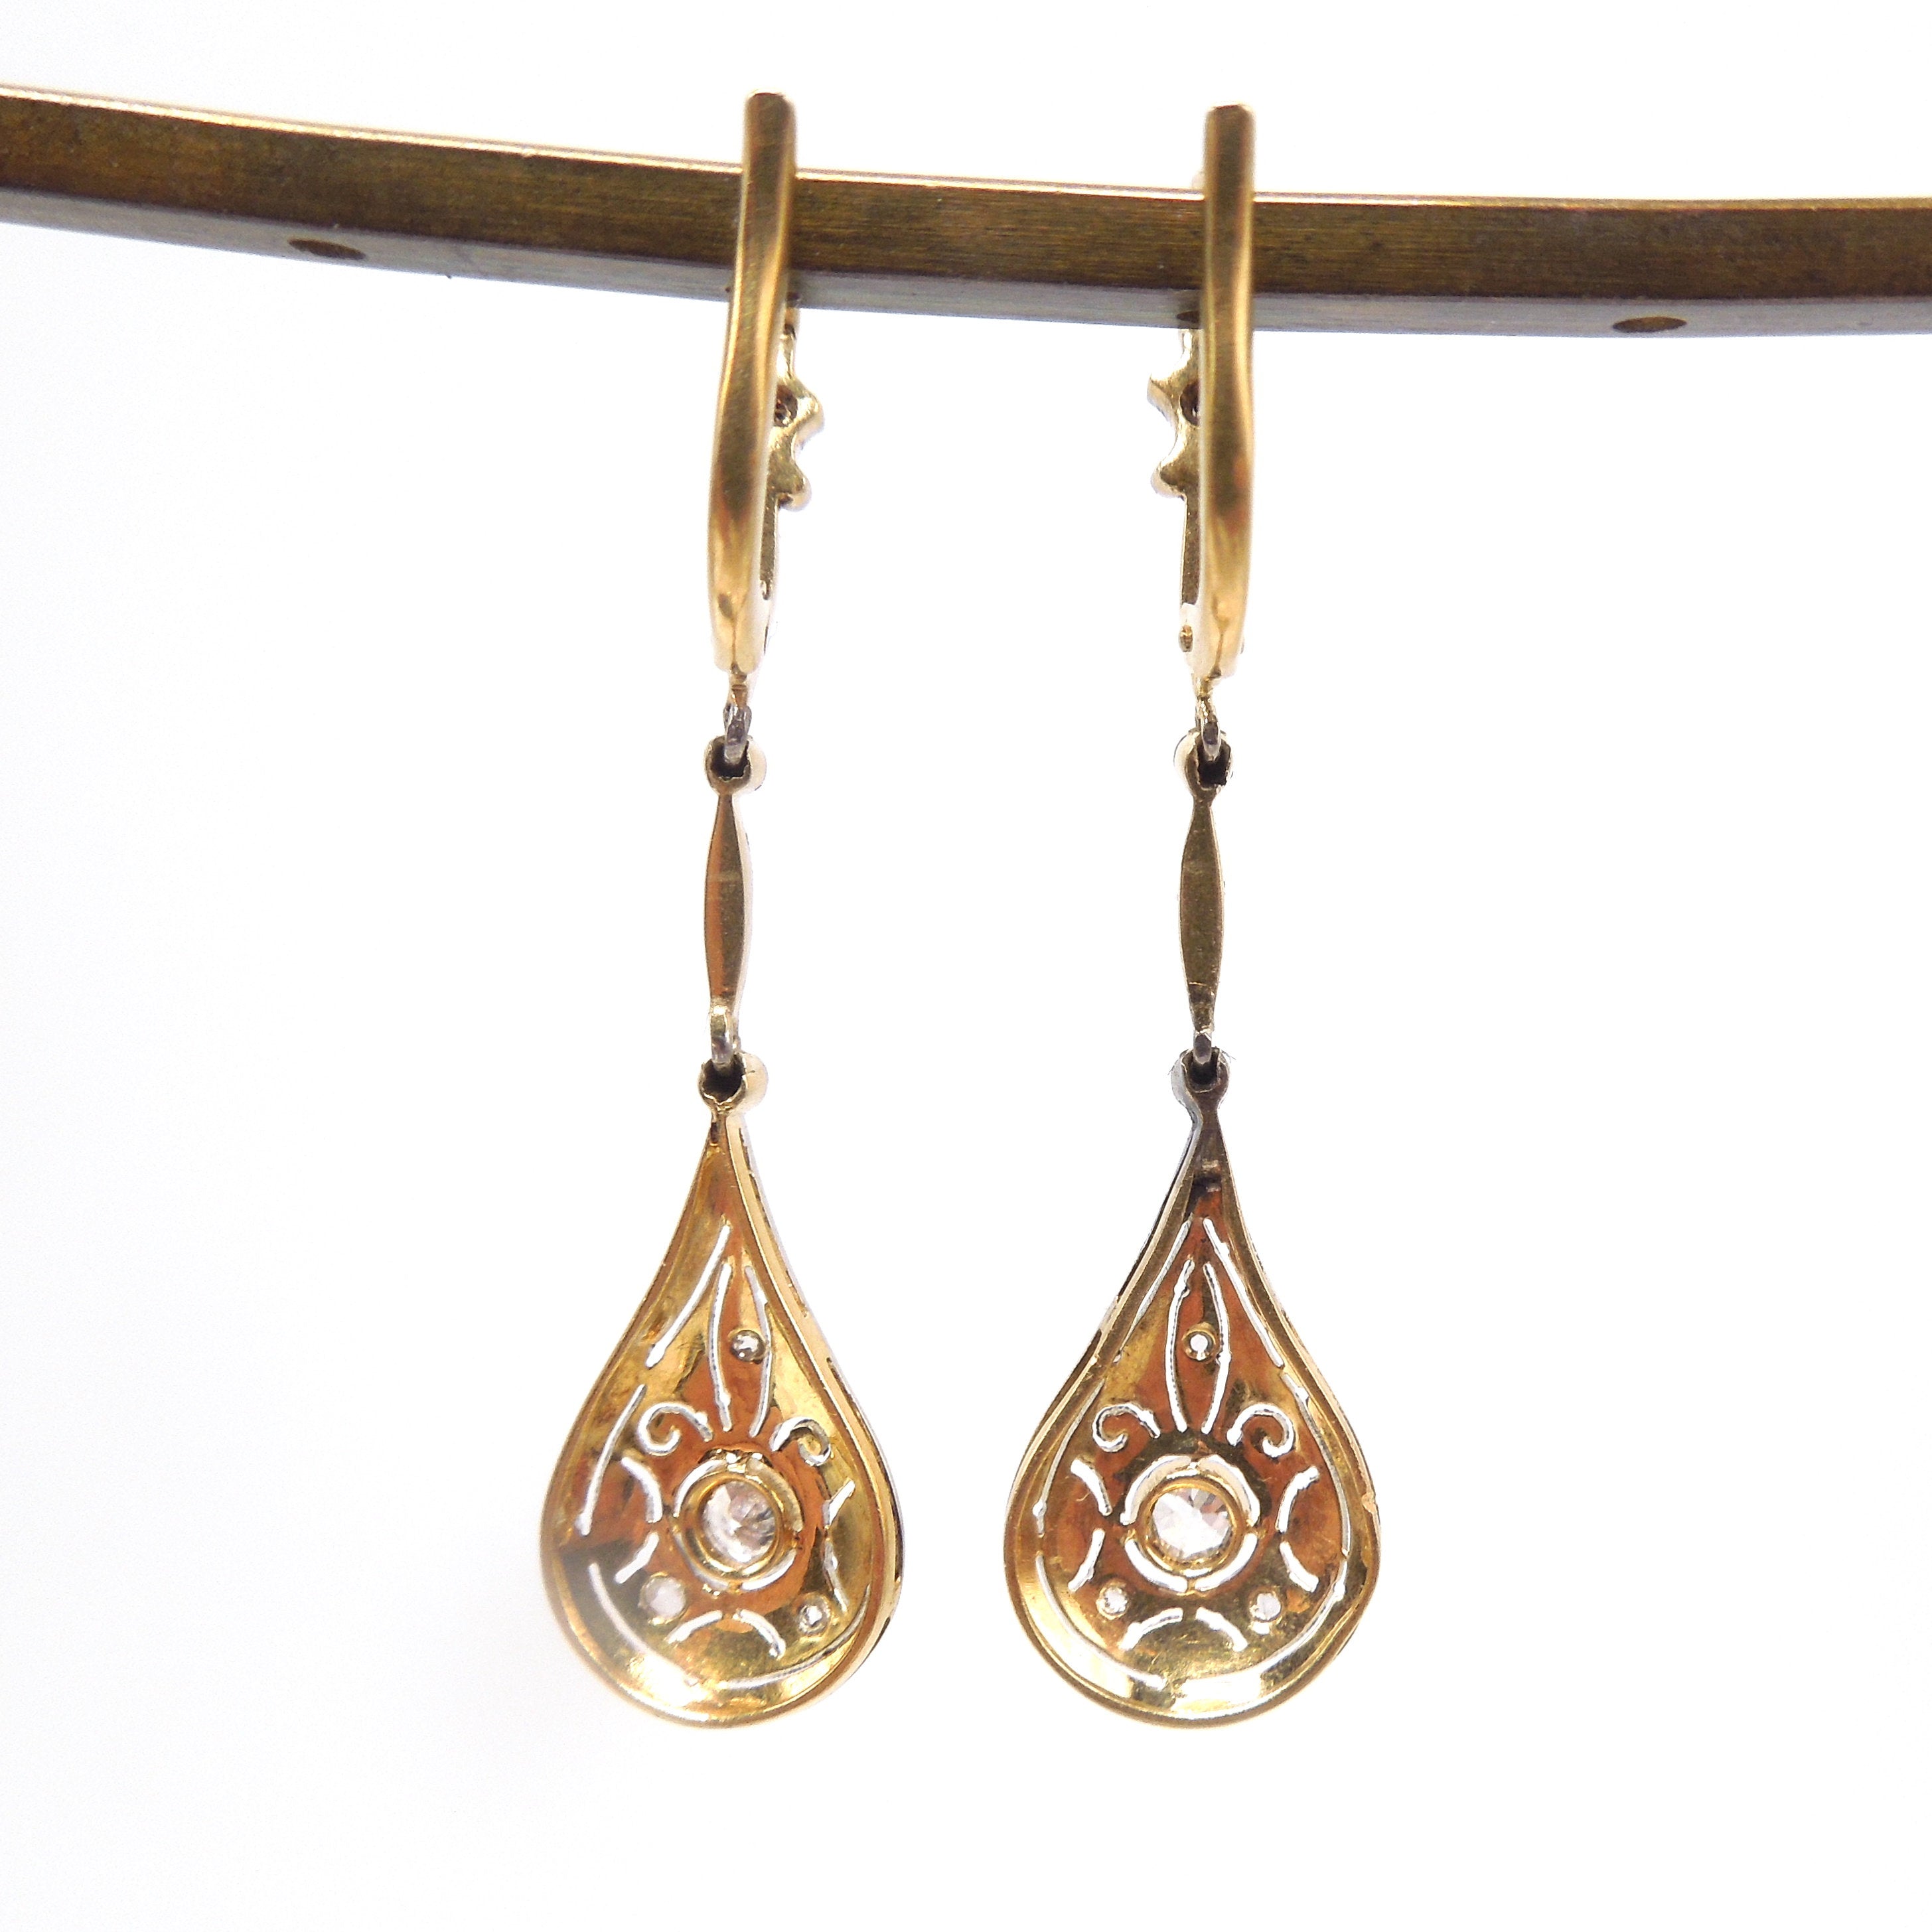 Edwardian Platinum and 18K Yellow Gold Drop Earrings with European and Rose Cut Diamonds